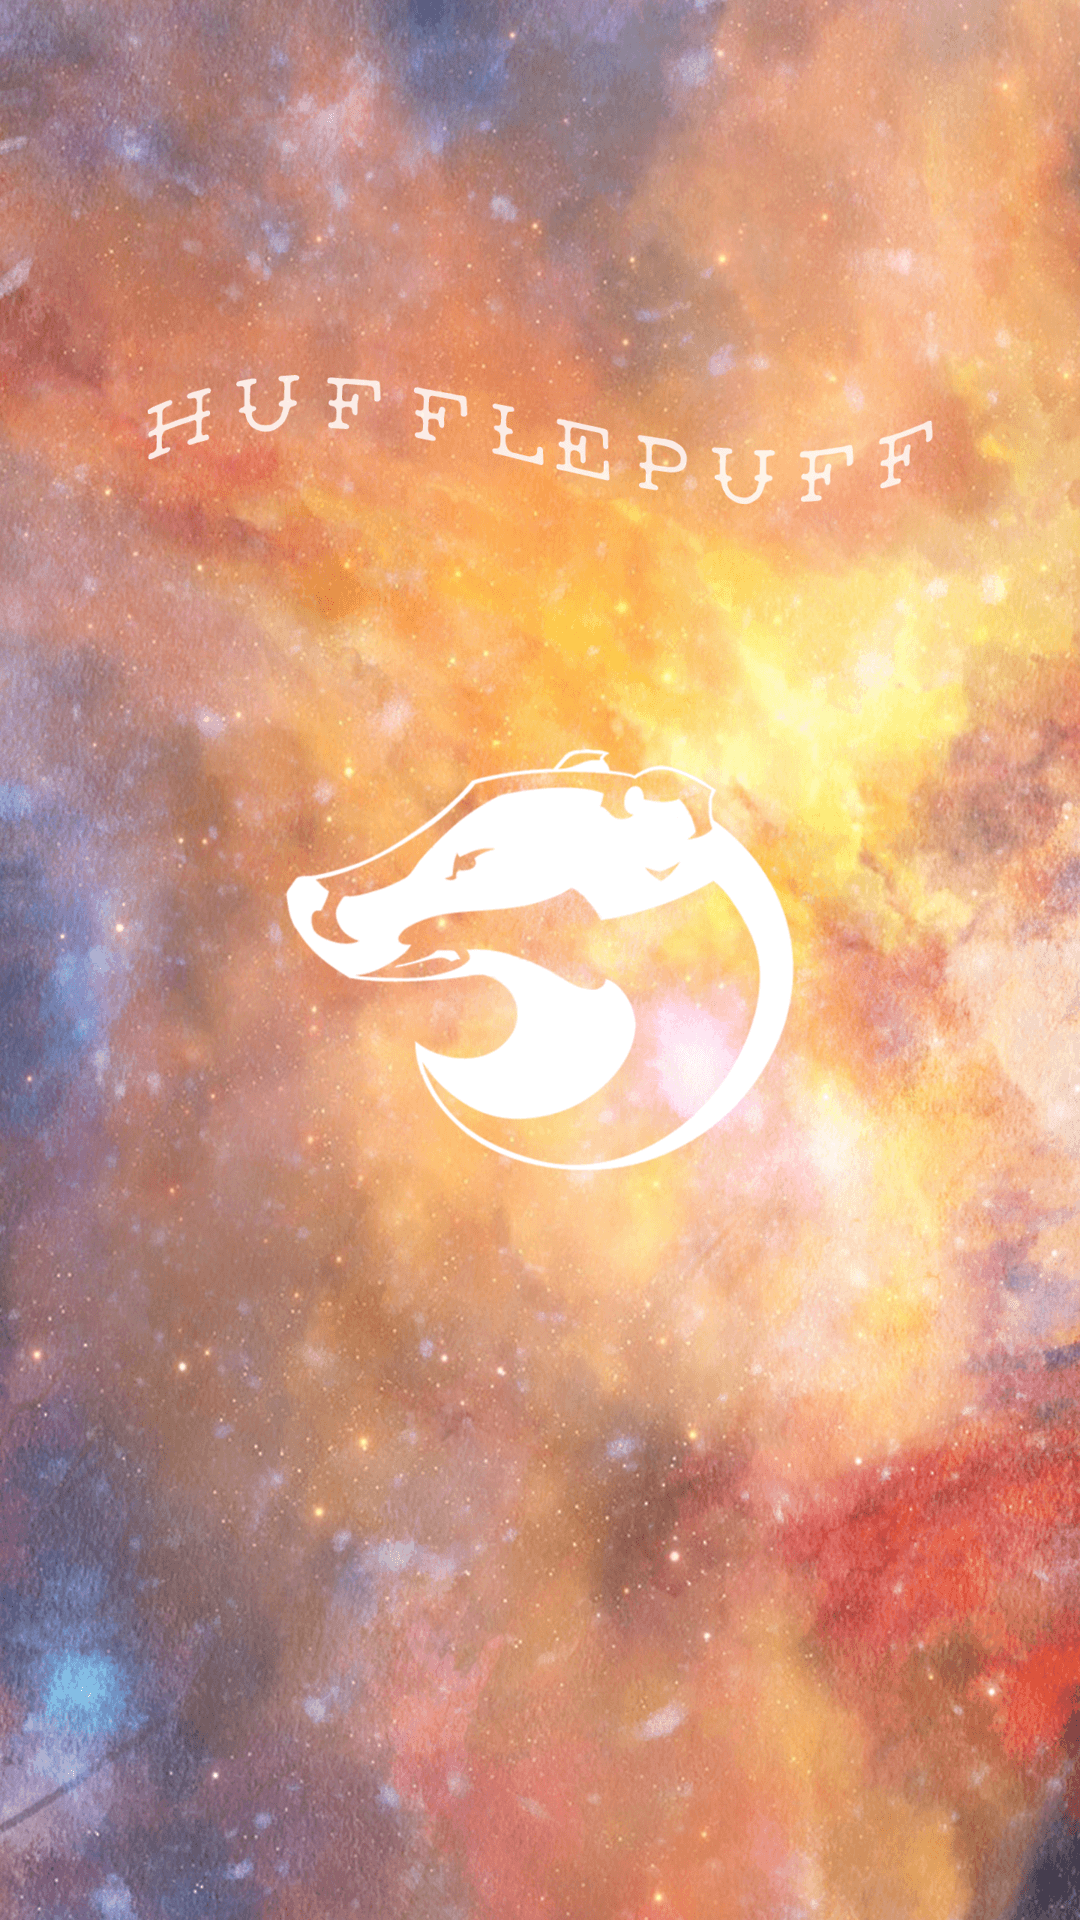 Harry Potter phone wallpapers + cosmos. All are 1440 x 2560 pixels